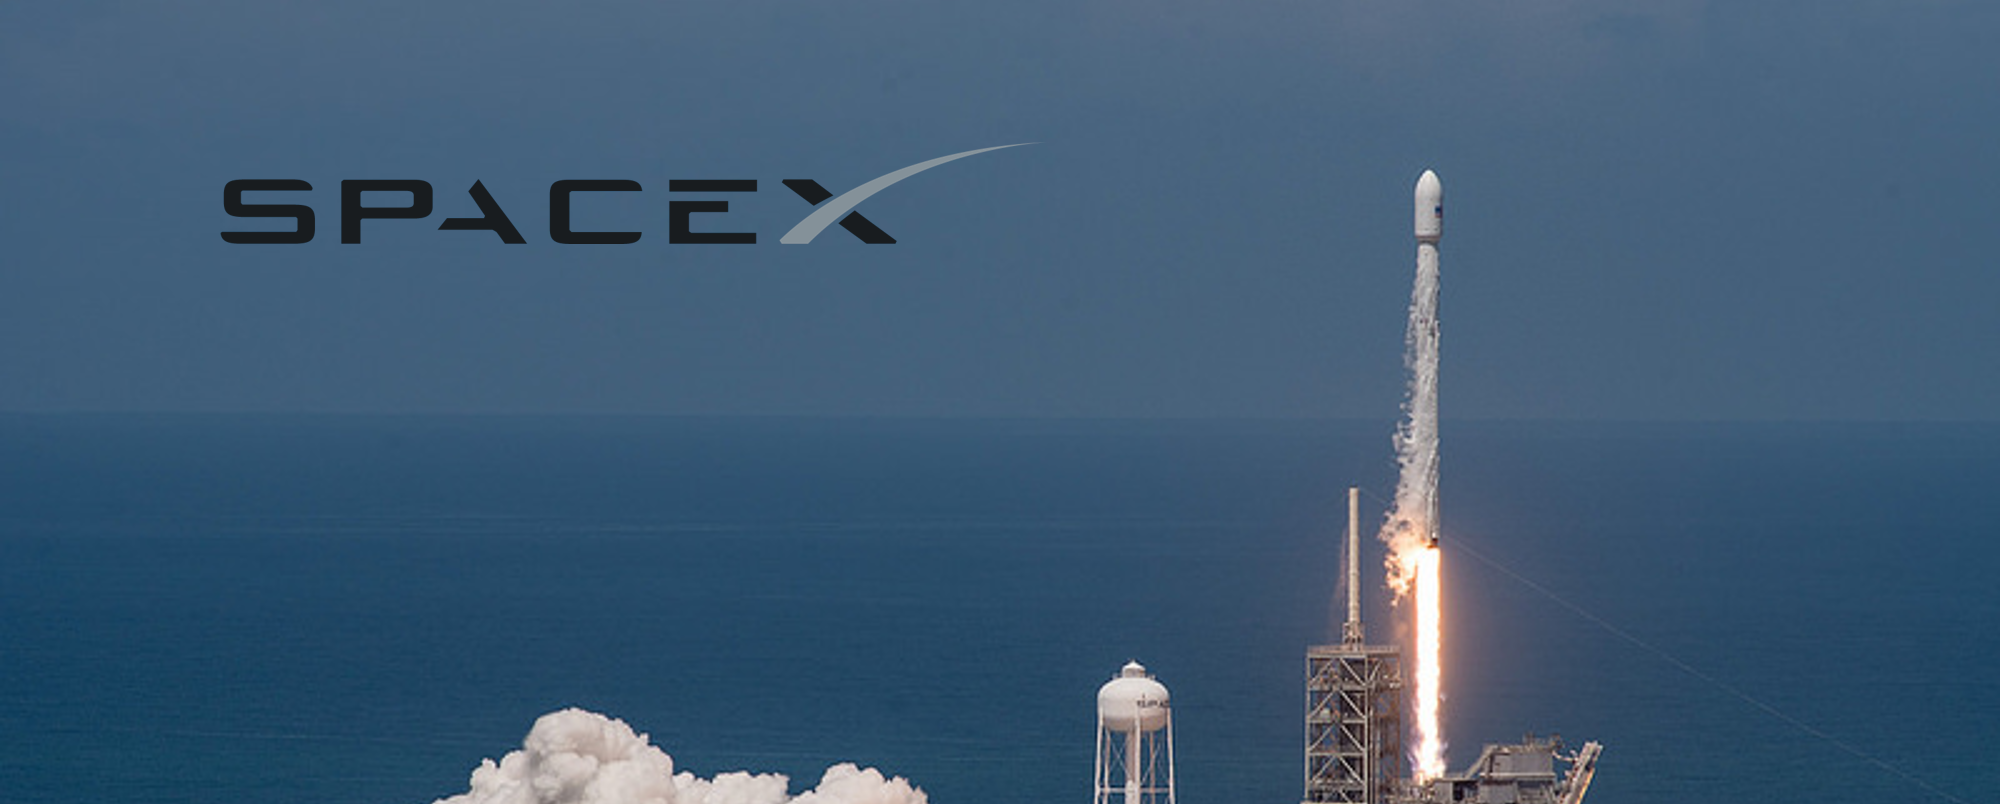 SpaceX banner